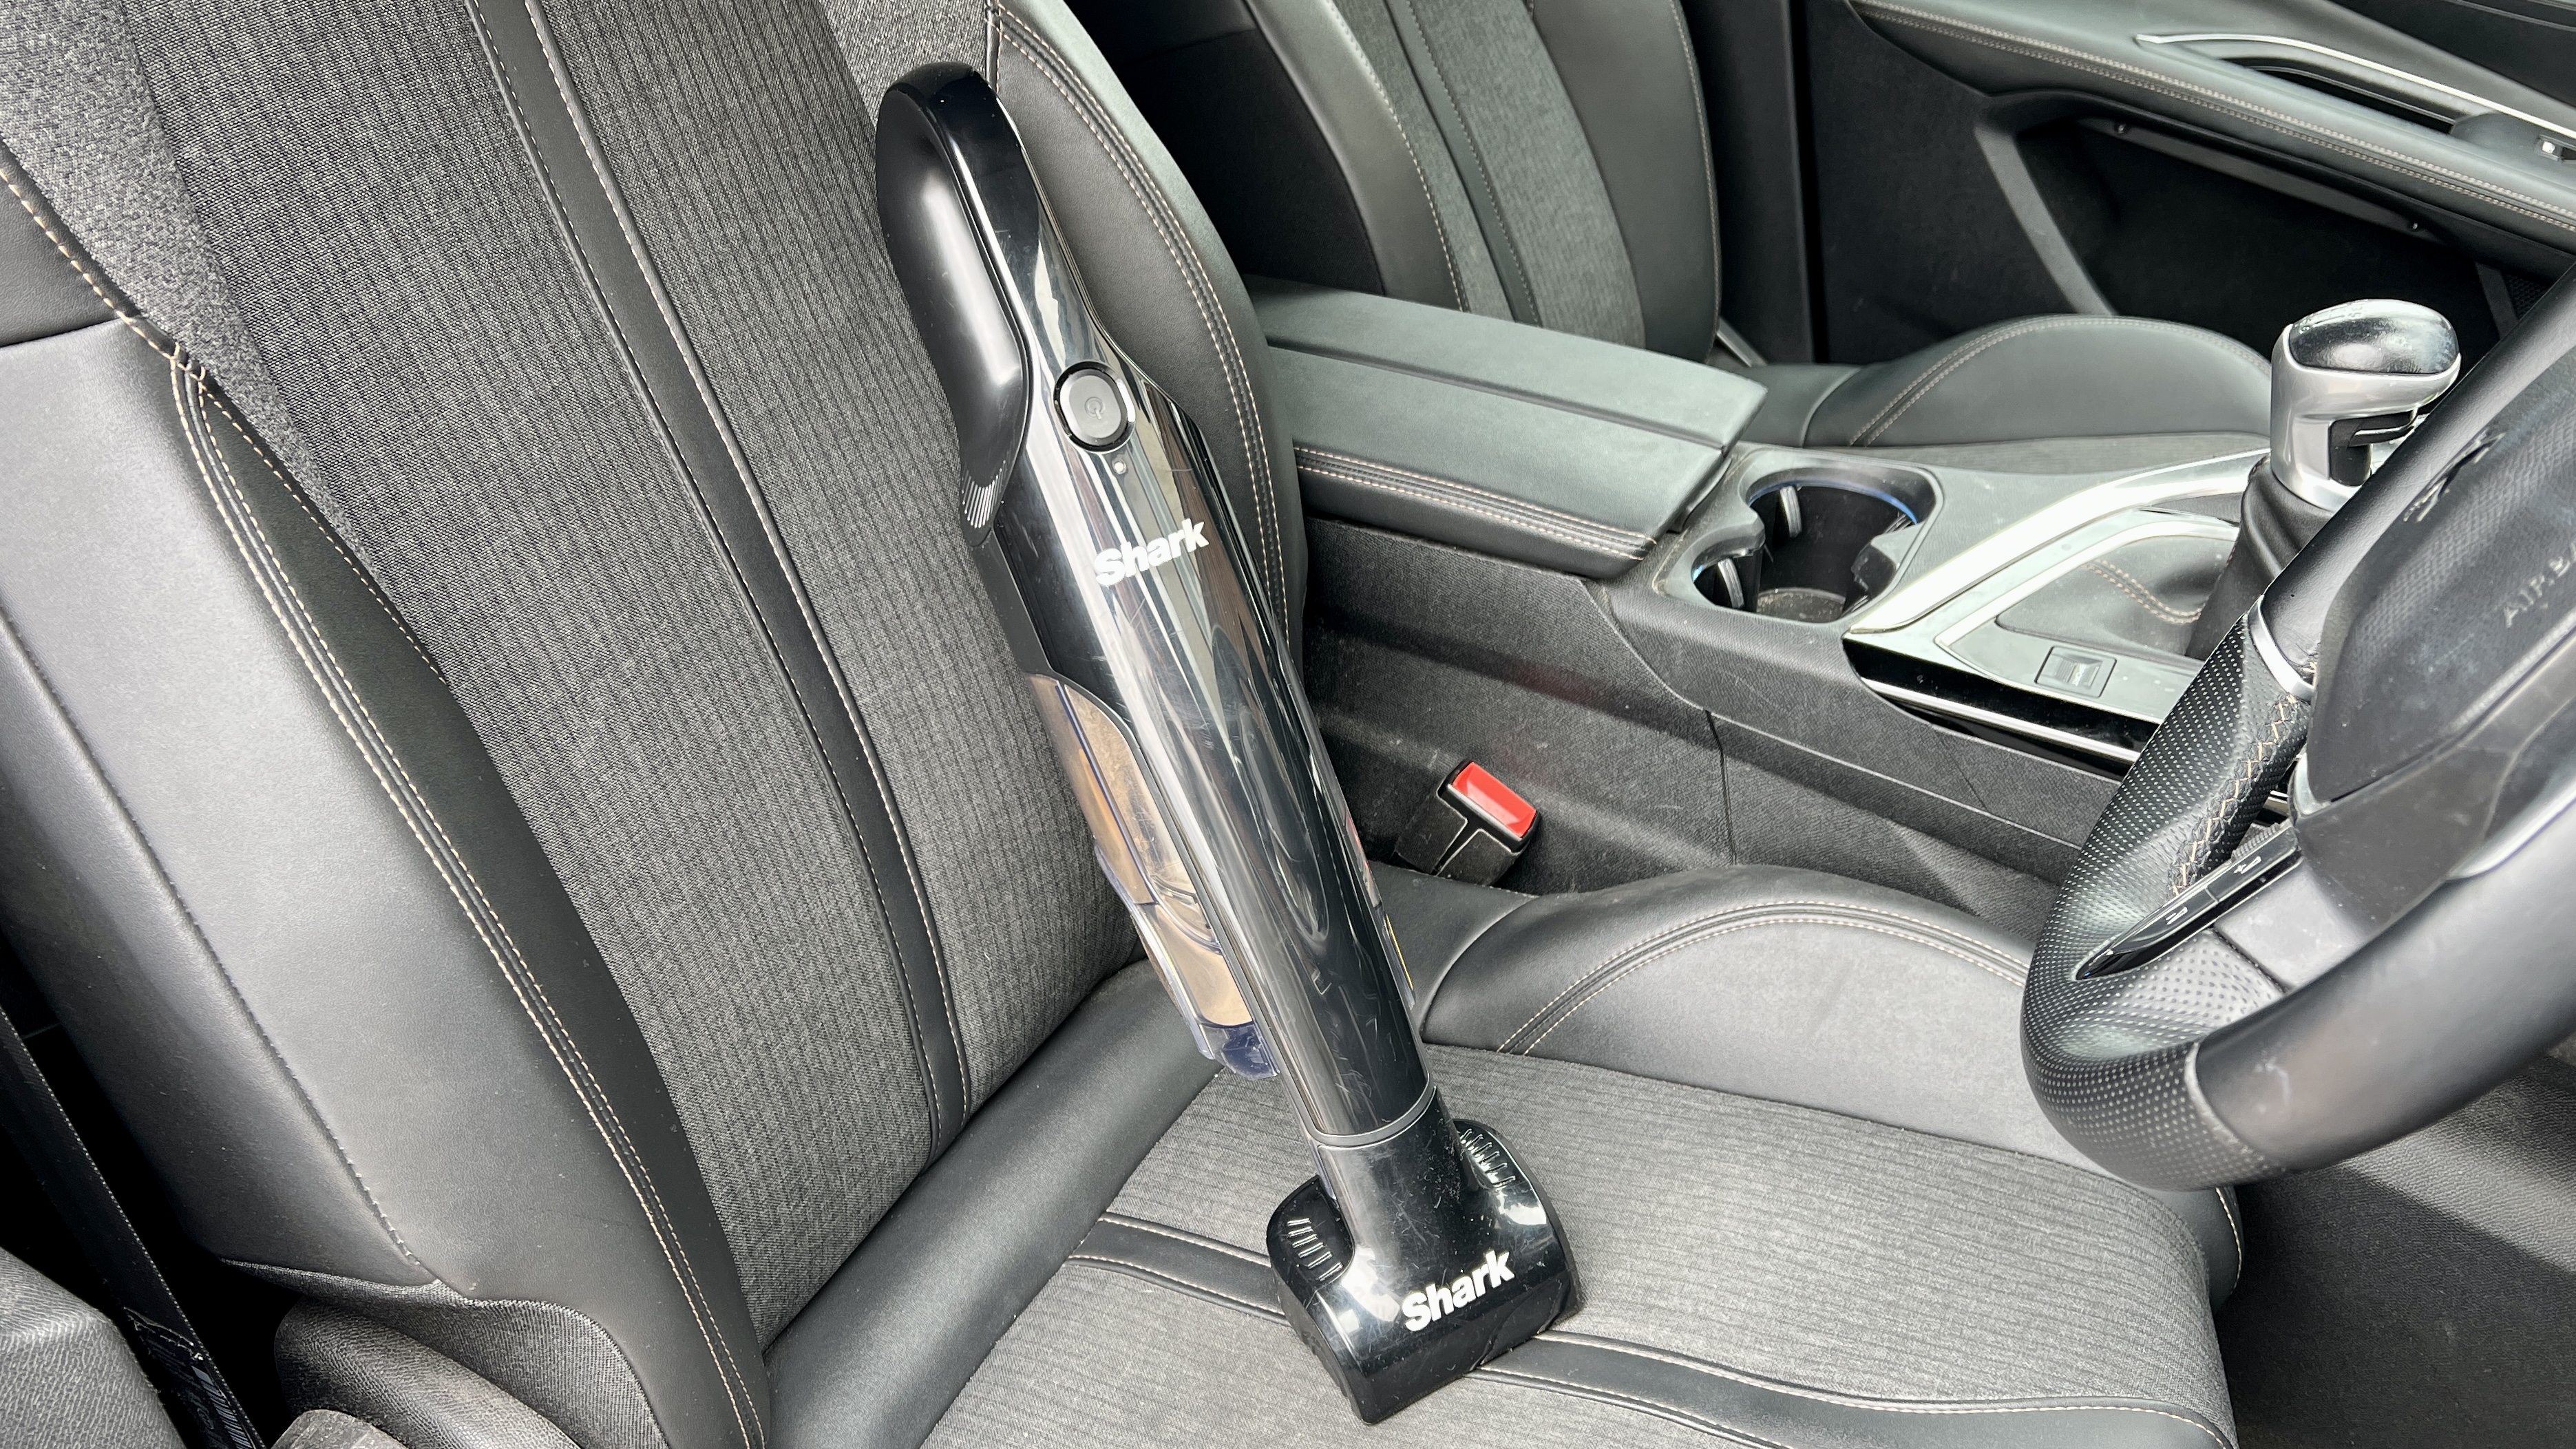 The Shark UltraCyclone Pet Pro Plus handheld vacuum resting on reviewer's car seat